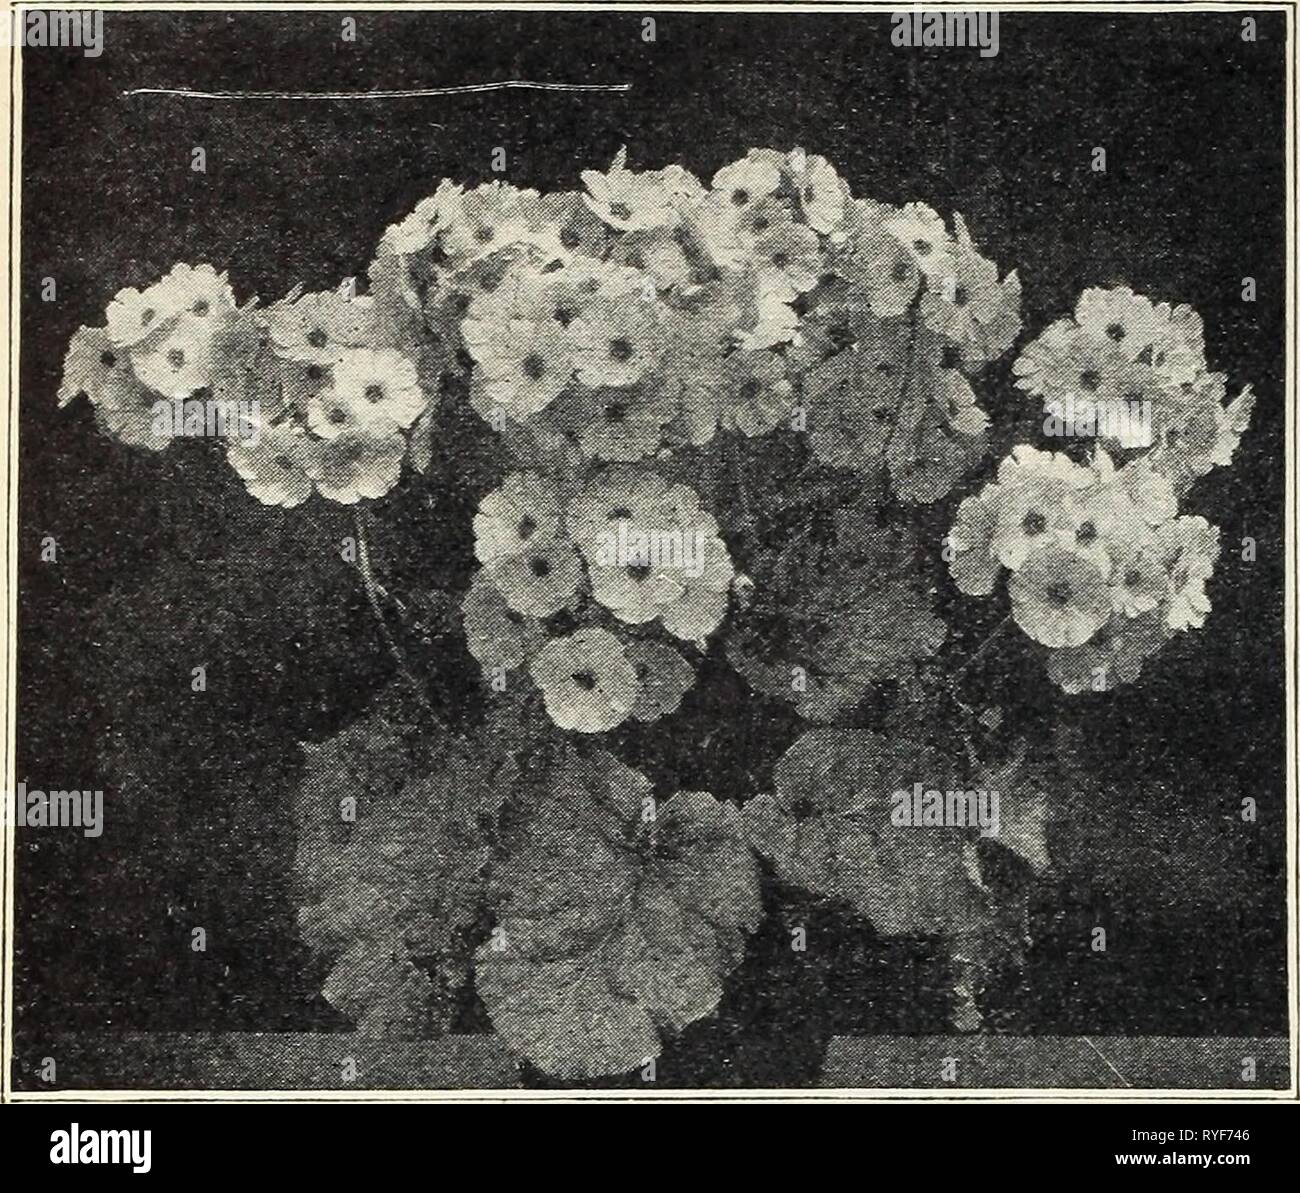 Dutch bulbs for spring blooming  dutchbulbsforspr1928wwba Year: 1928  32 Florists' Price List — Fall 1928 — The W. W. Barnard Co., 3942 S. Federal St., Chicago    PRIMULA FRINGED CHINESE PRIMROSES Chiswick Red Rose T. Pkt. Crimson King- True Blue Salmon White Pink Separate Colors....$0.75 Mixed Fringed 0.50 PRIMULA. OBCONICA VARIETIES (Arend's Strain— Grandiflora Alba „ 75 Apple Blossom 75 Kermesina, Crimson „ 75 Rosea 75 Pure White 75 Obconica, mixed 75 Fire Queen 75 Gigantea Apple Blossom 1.00 Kermesina 1.00 Rosea - 1.00 Mixed 1.00 Mueller 1.25 Mohnstein 1.25 Berlin (Grilles Strain) Improved Stock Photo